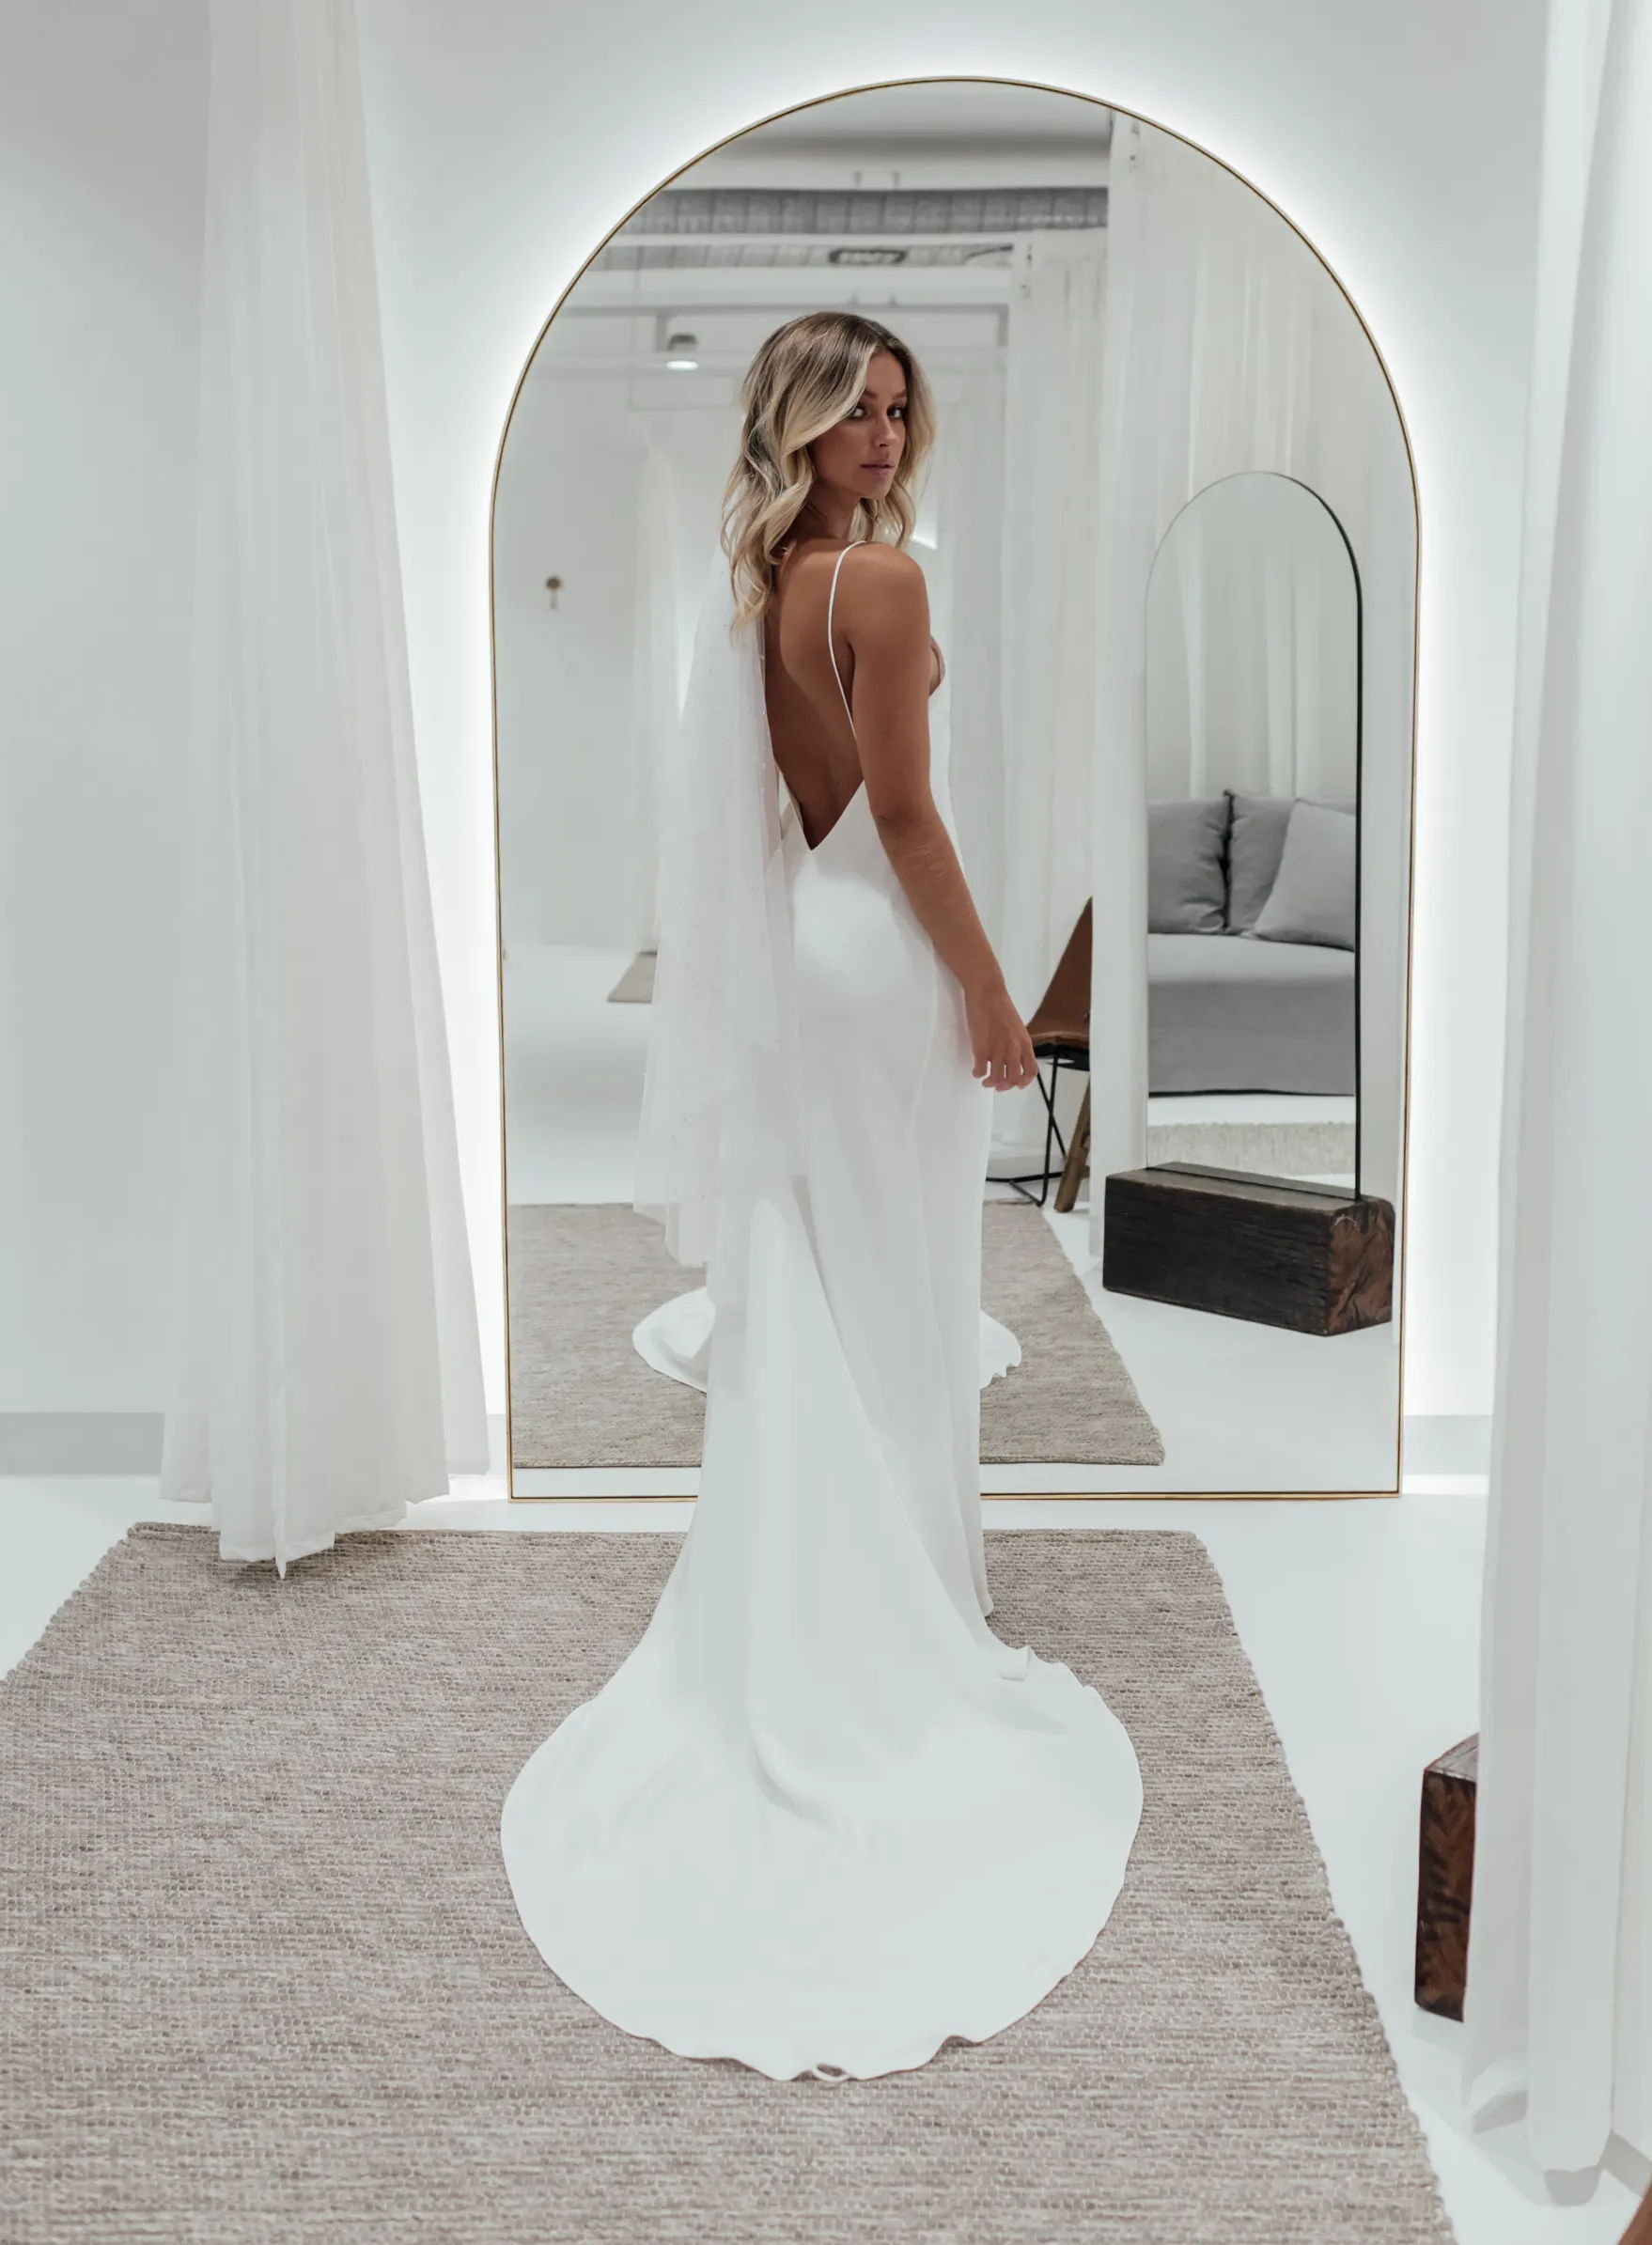 Bride wearing the Grace Loves lace Summer Silk wedding dress with arch illuminated mirror